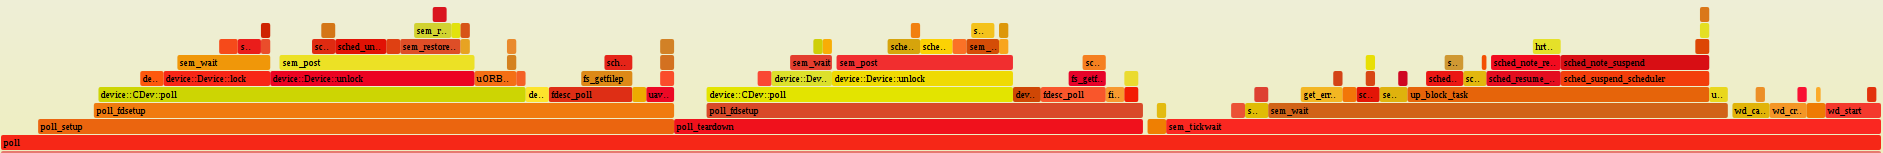 FlameGraph Example